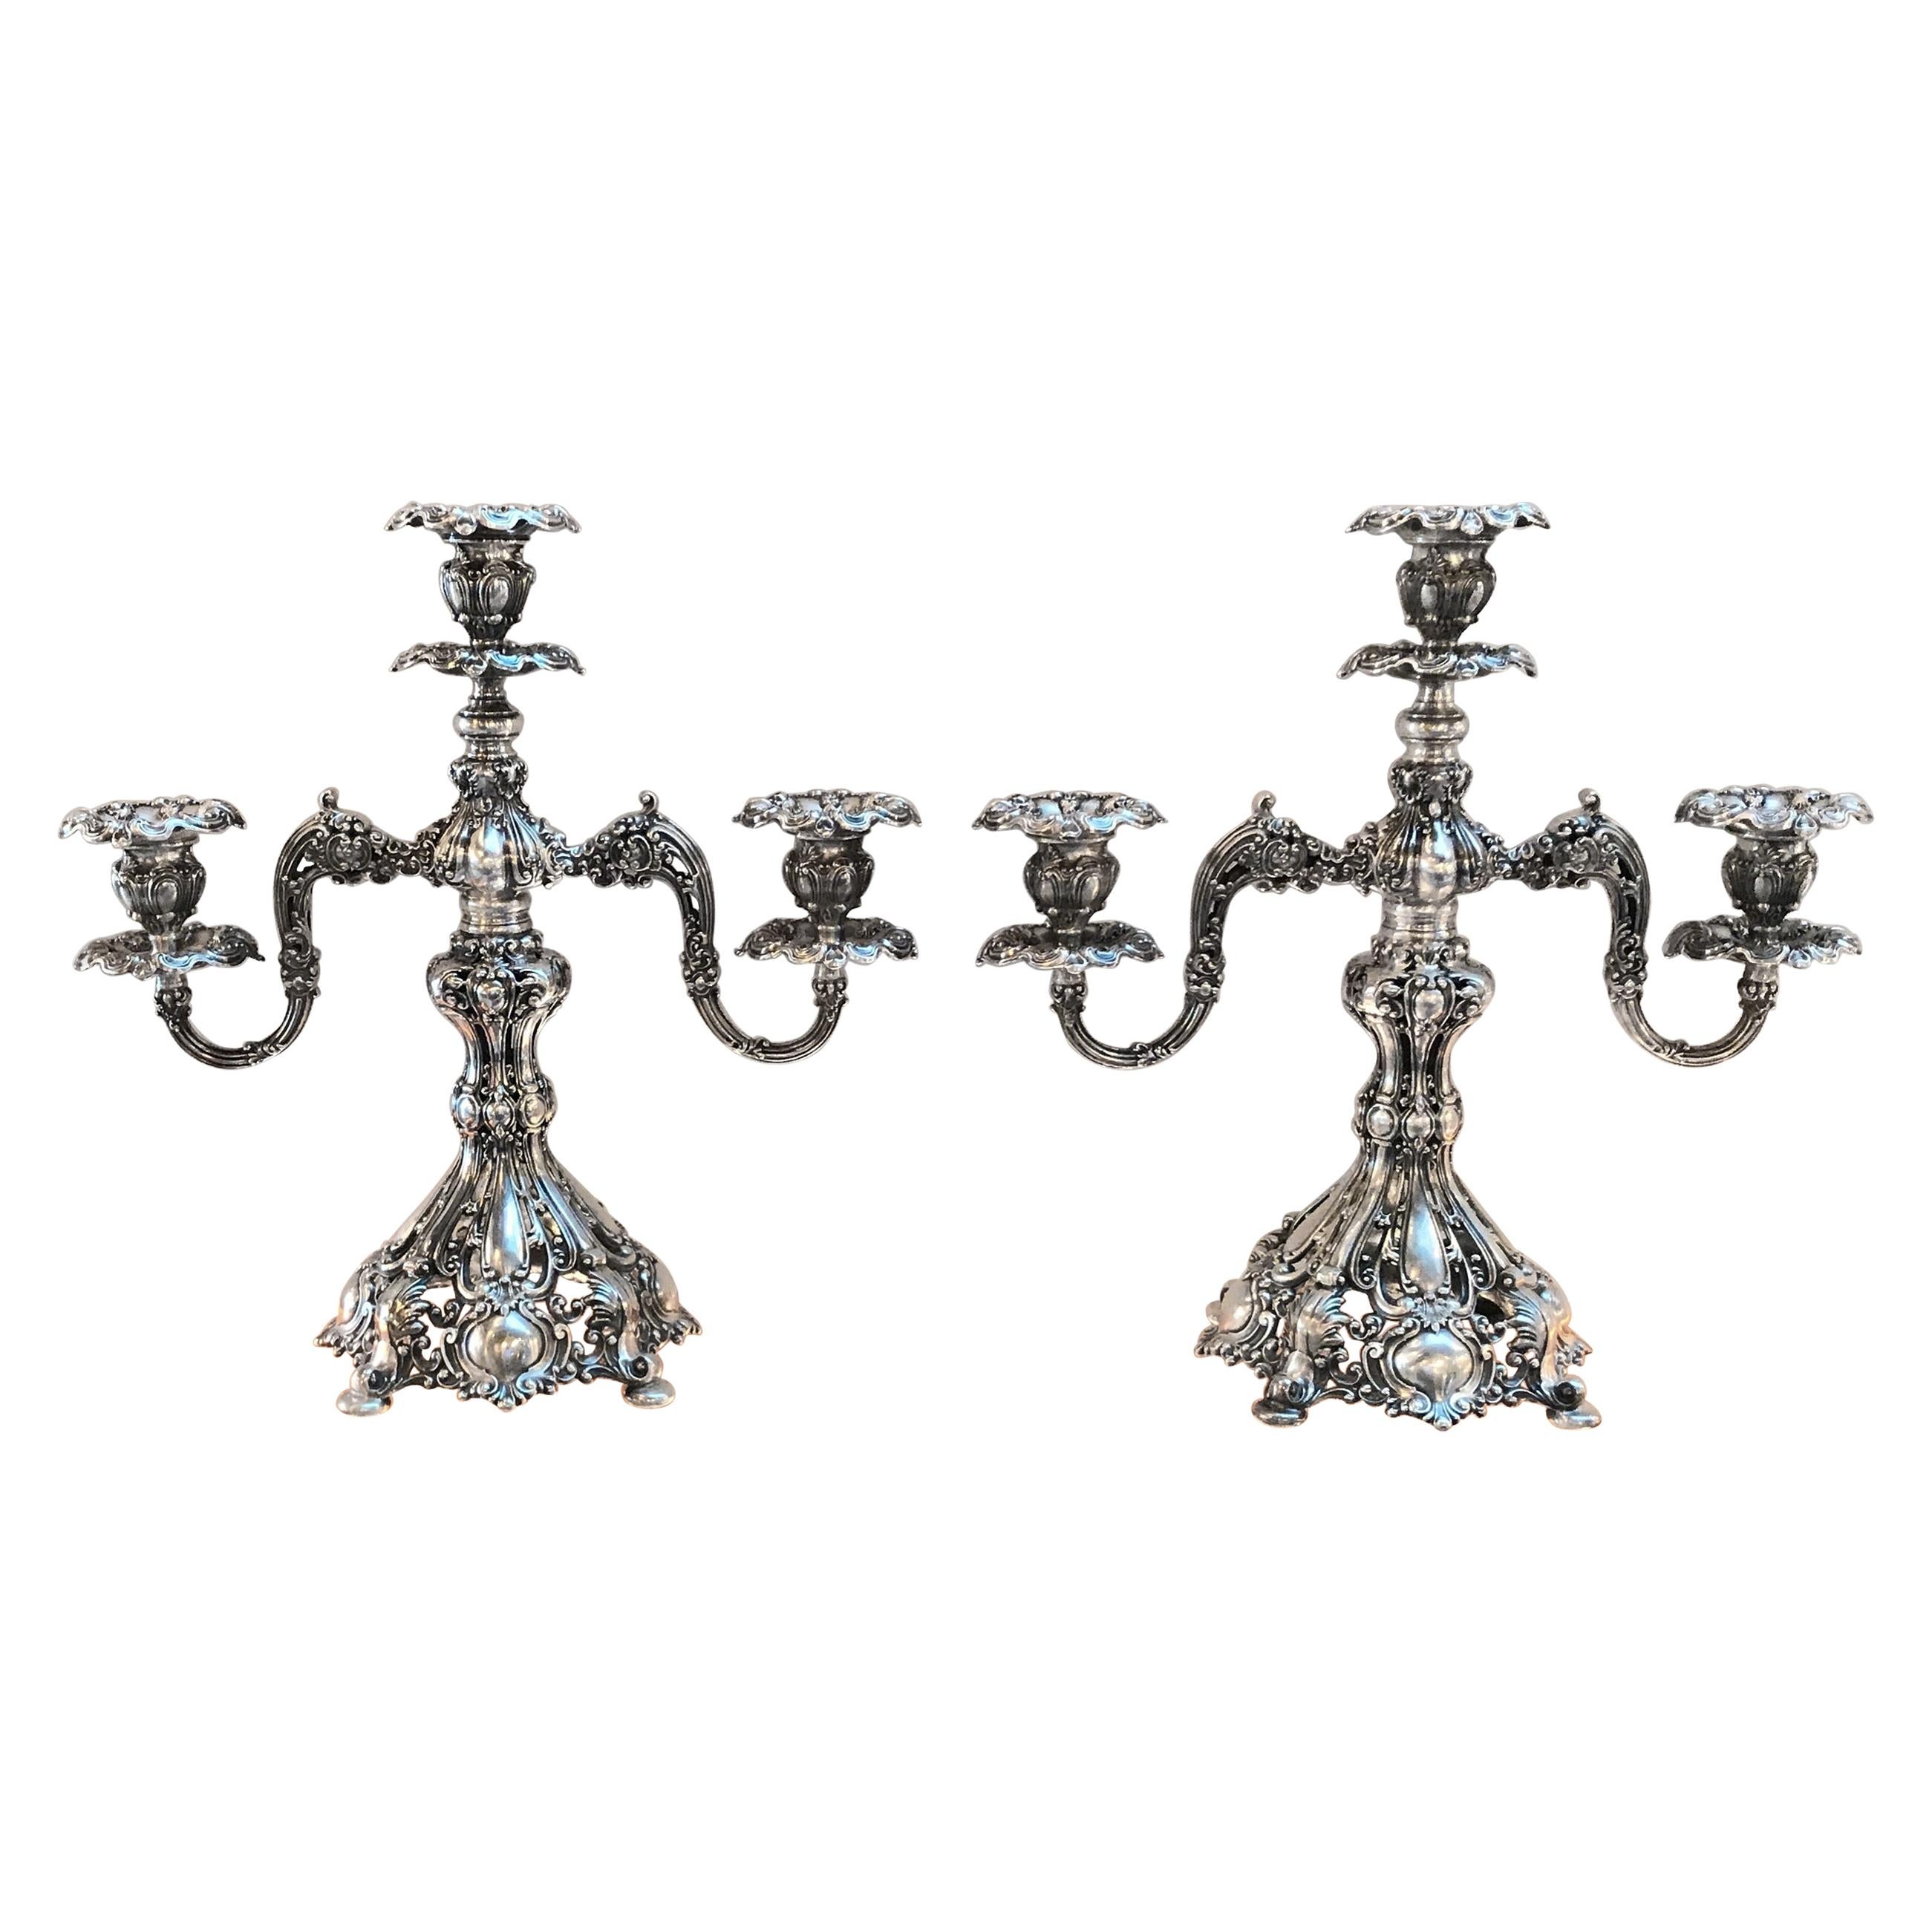 Pair of Baroque Silver Plate Candelabra "Renaissance" For Sale